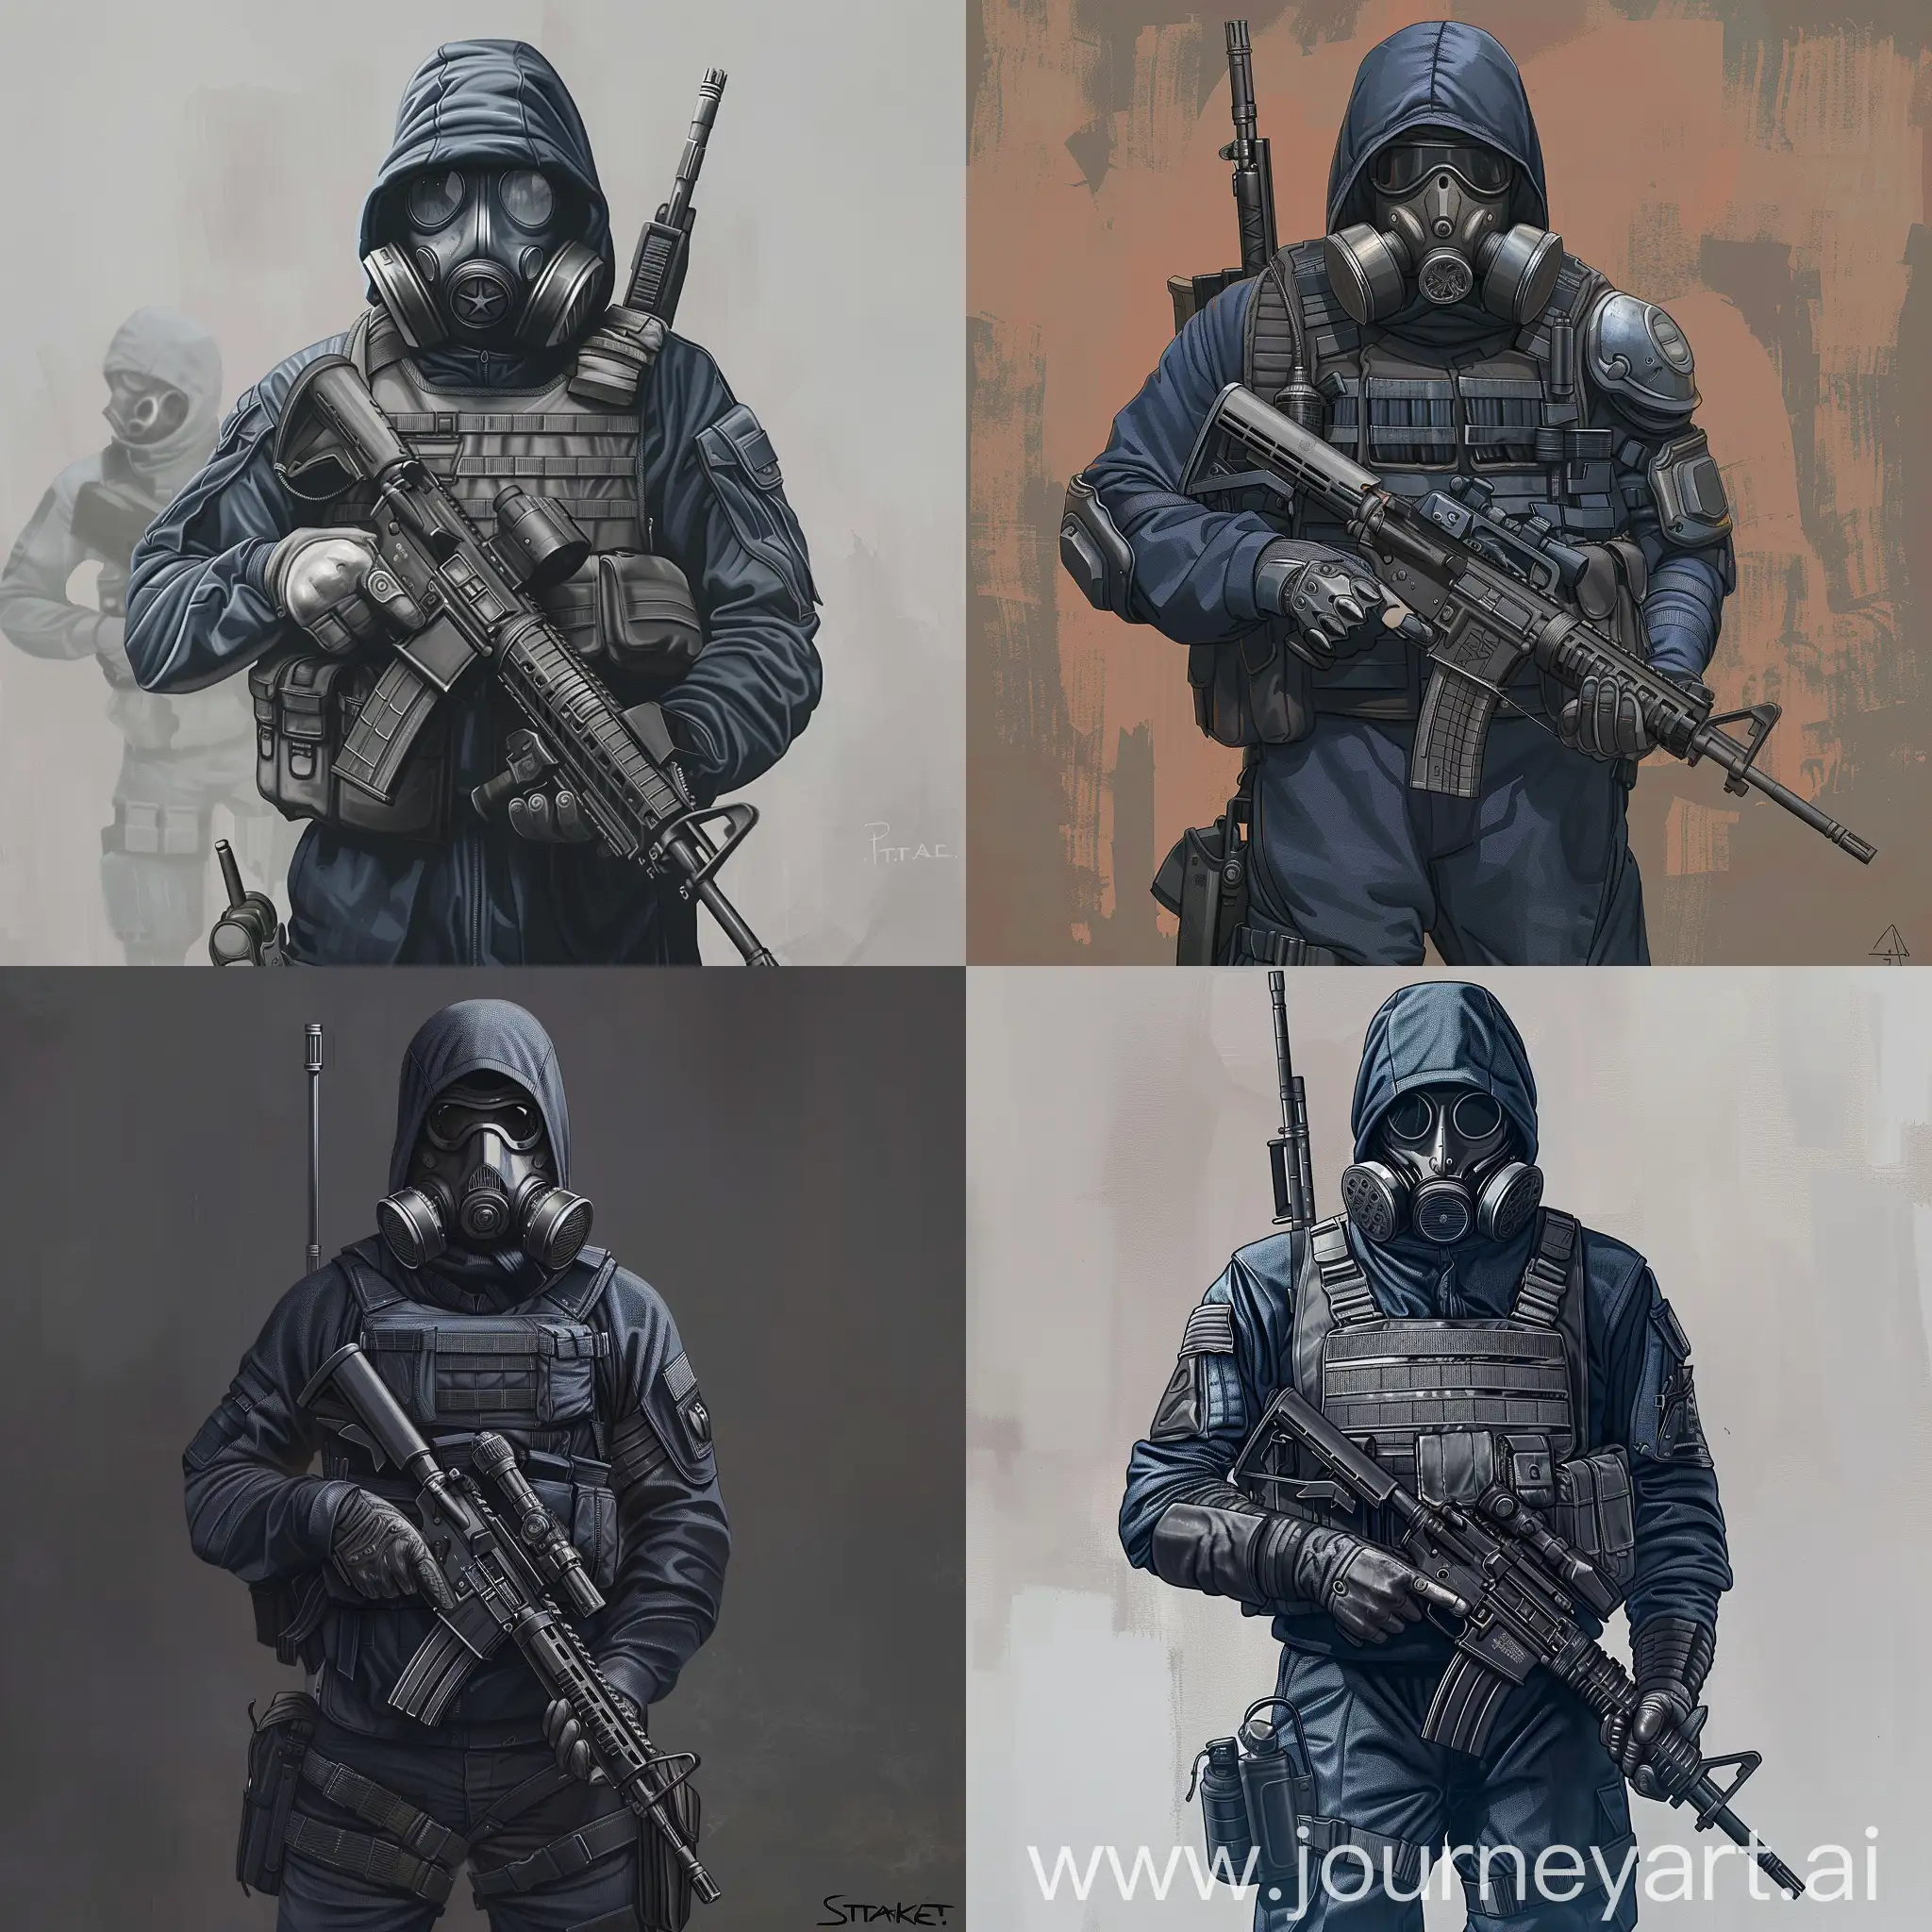 Digital art of a mercenary from the universe of S.T.A.L.K.E.R., dressed in a dark blue military jumpsuit, gray military armor on his body, a gasmask on his face, a mercenary wears a military exoskeleton, and a rifle in the hands of a mercenary.